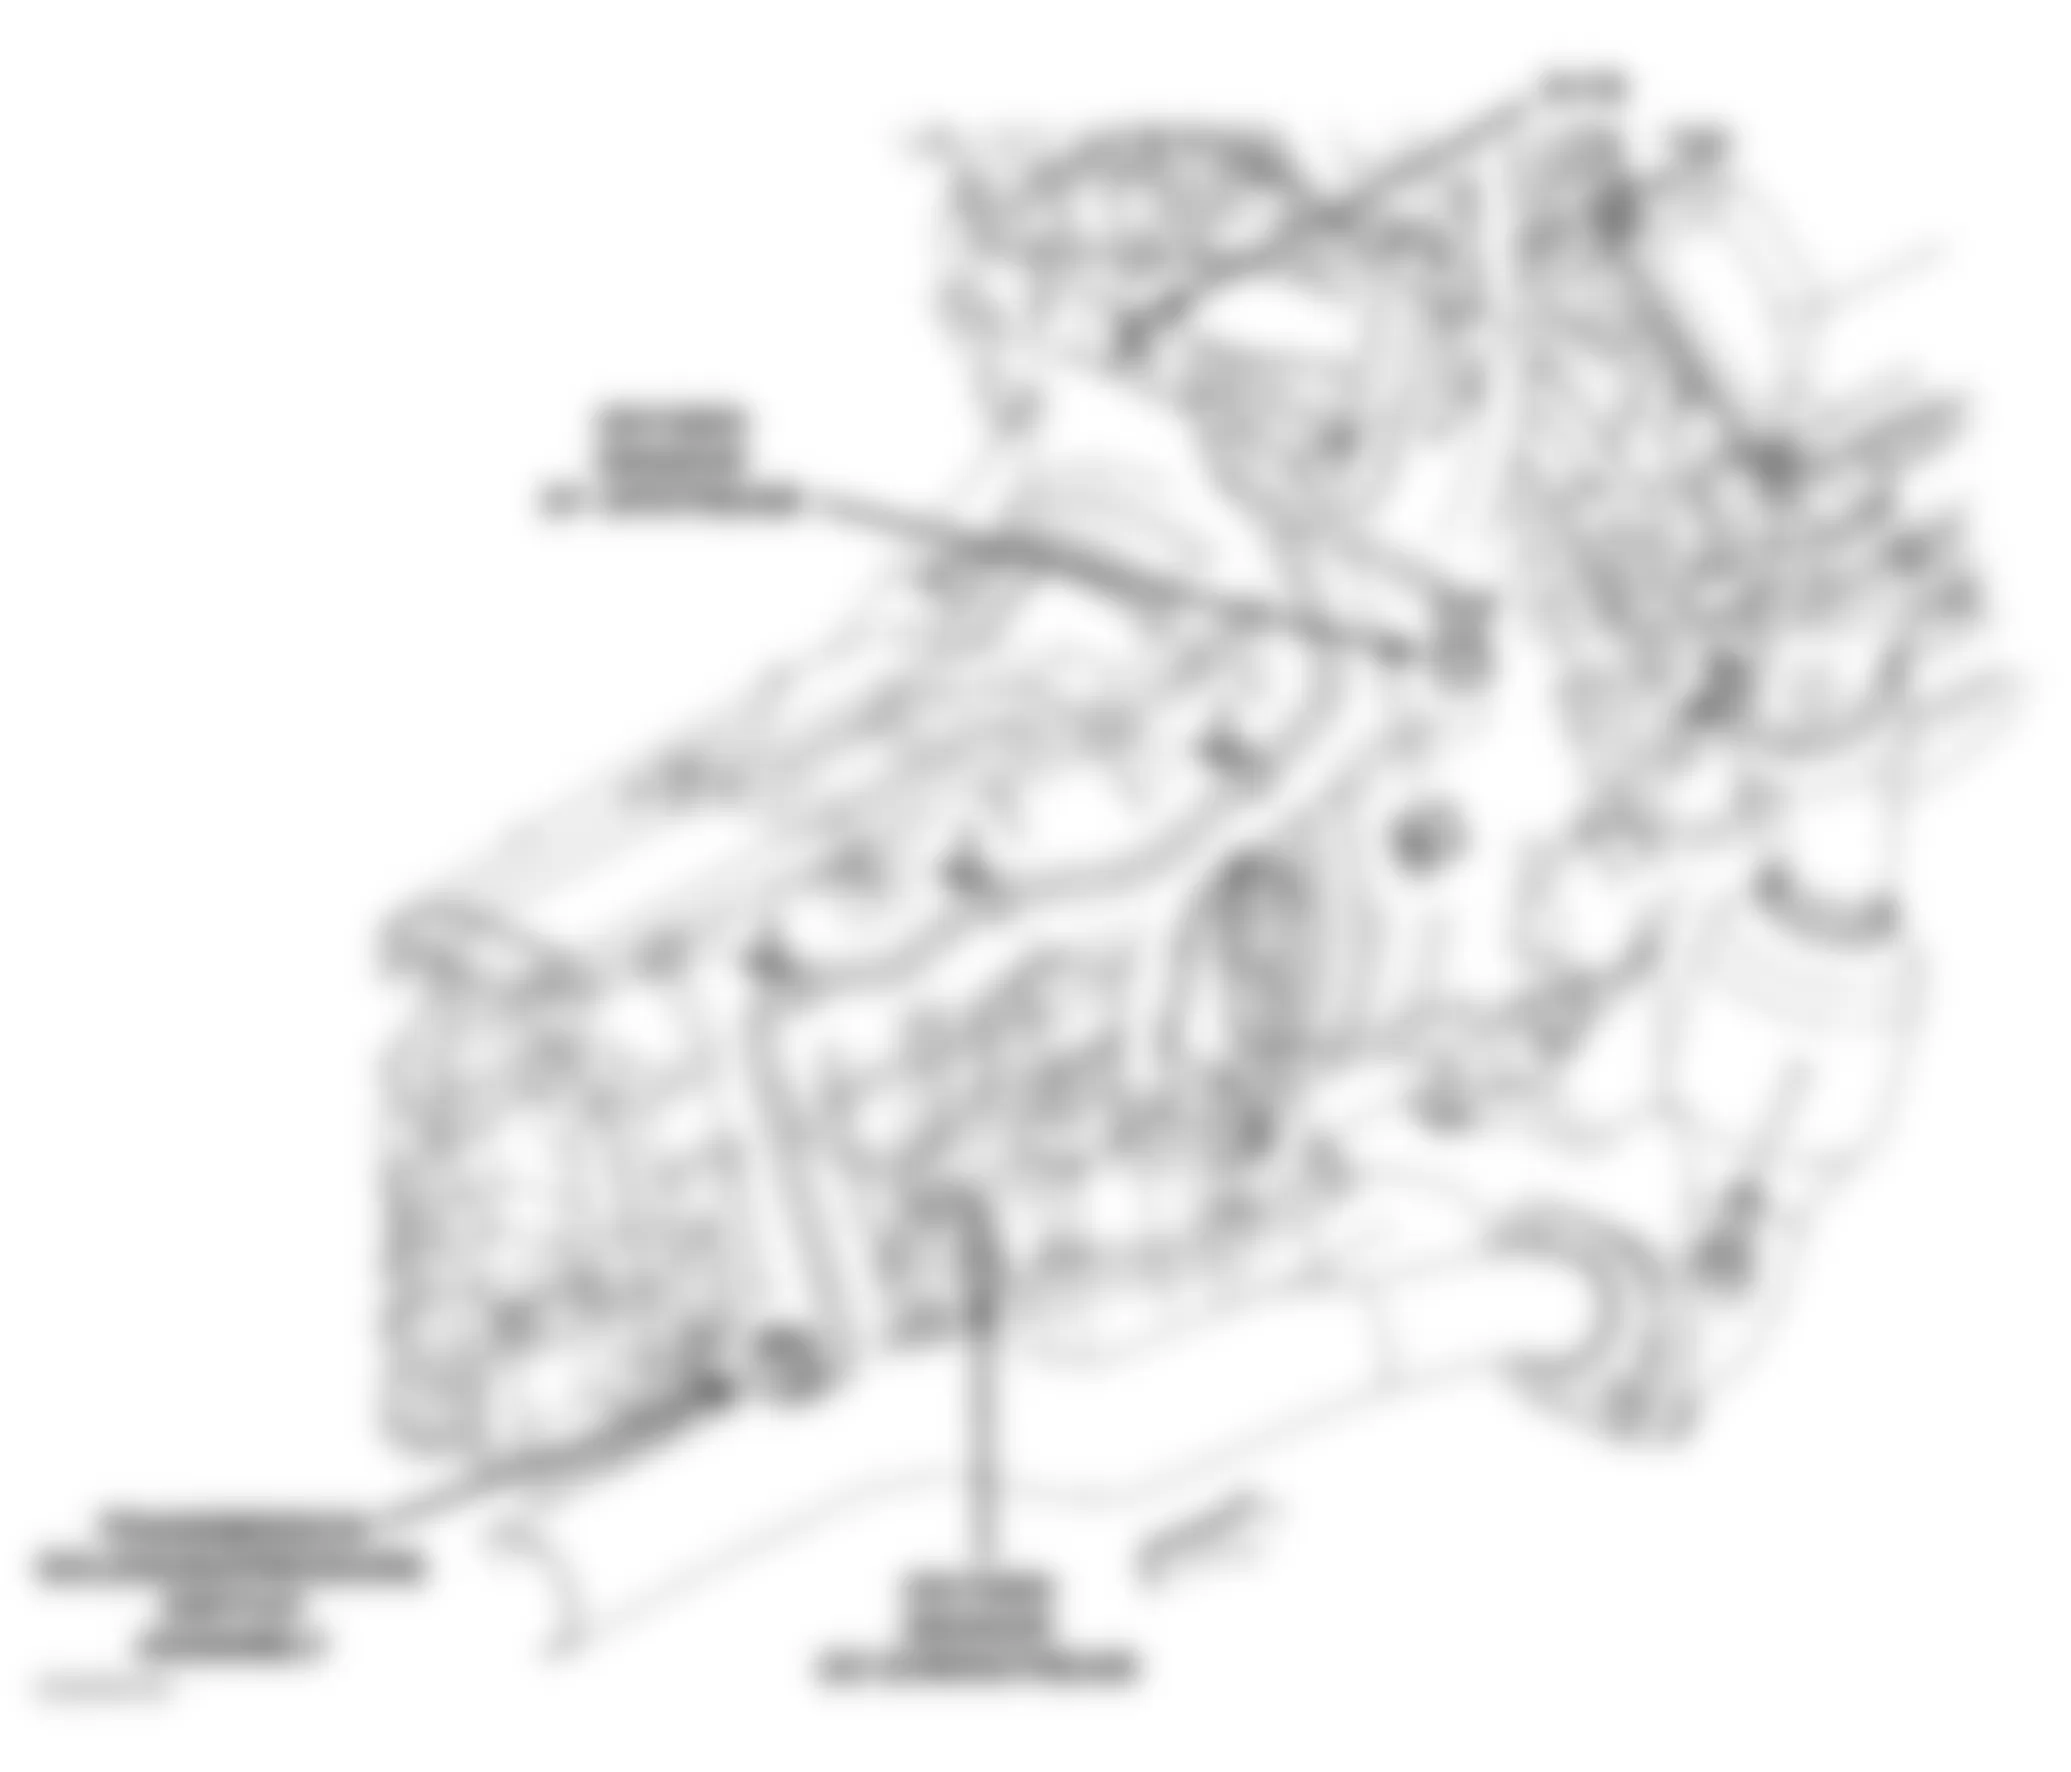 Jeep Liberty Limited 2004 - Component Locations -  Right Side Of Transmission (3.7L)